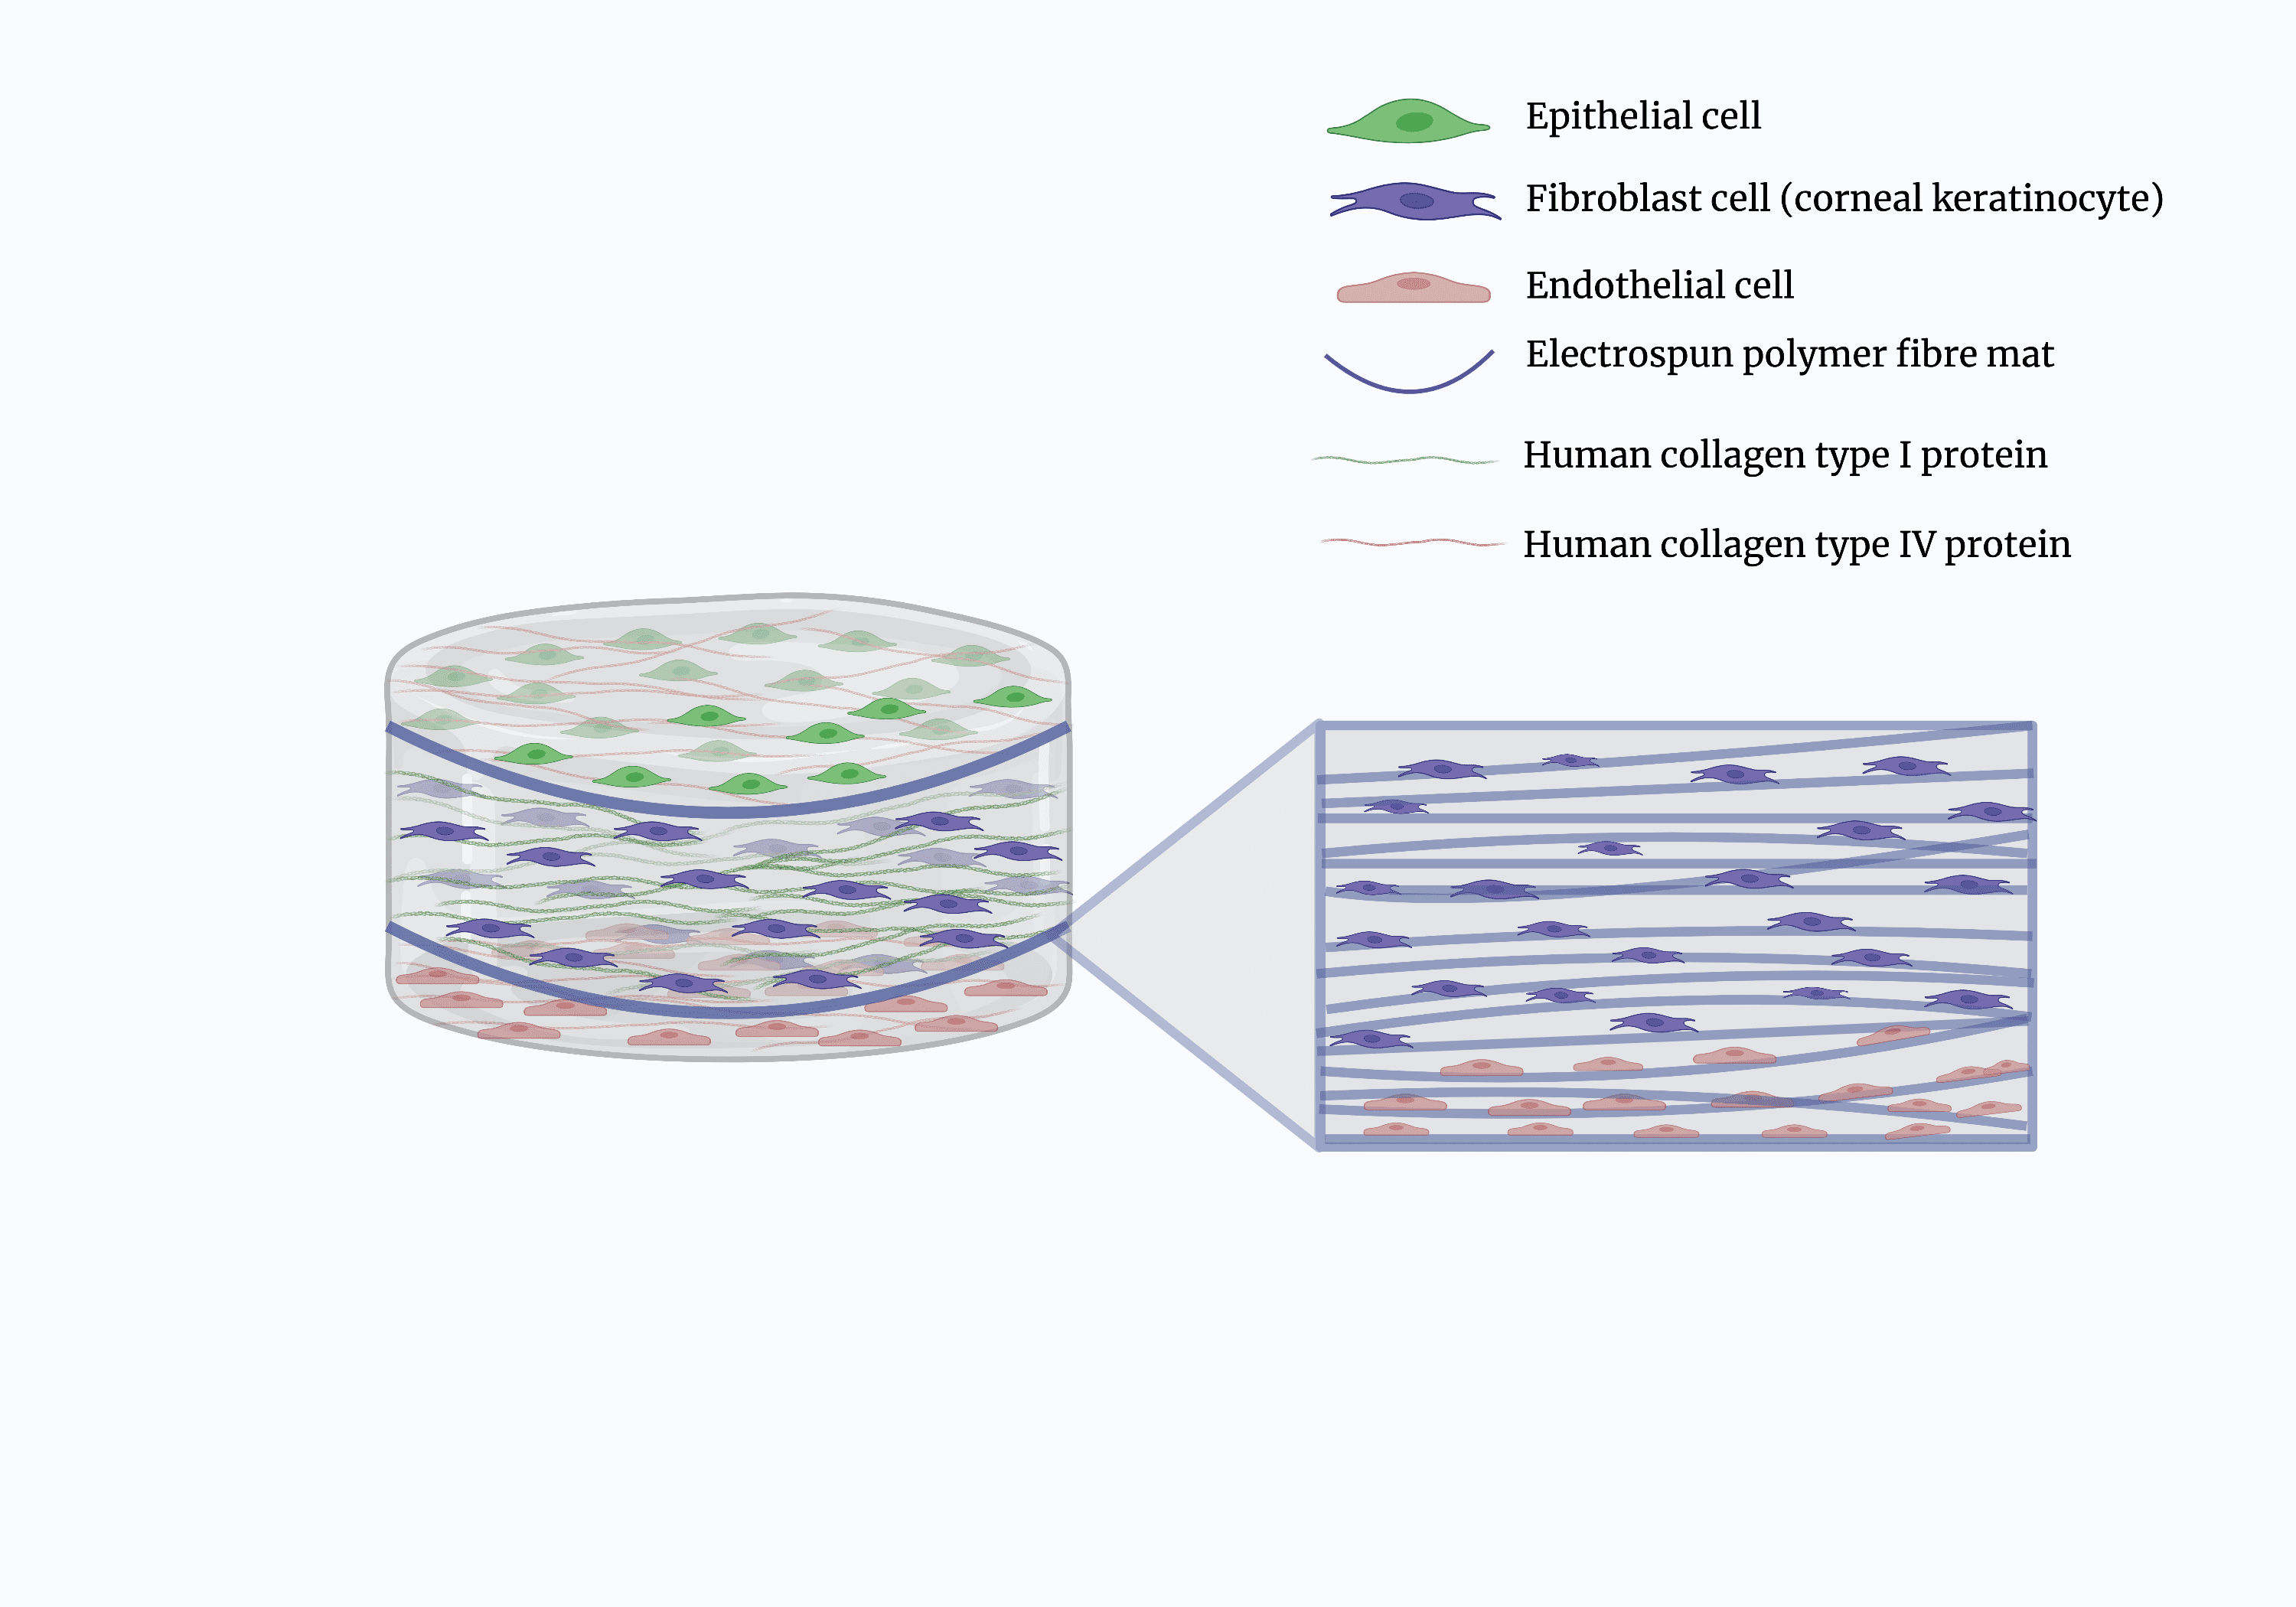 Fig. 1. Schematic representation of corneal model, showing the various cell types, collagens, and polymer mats.